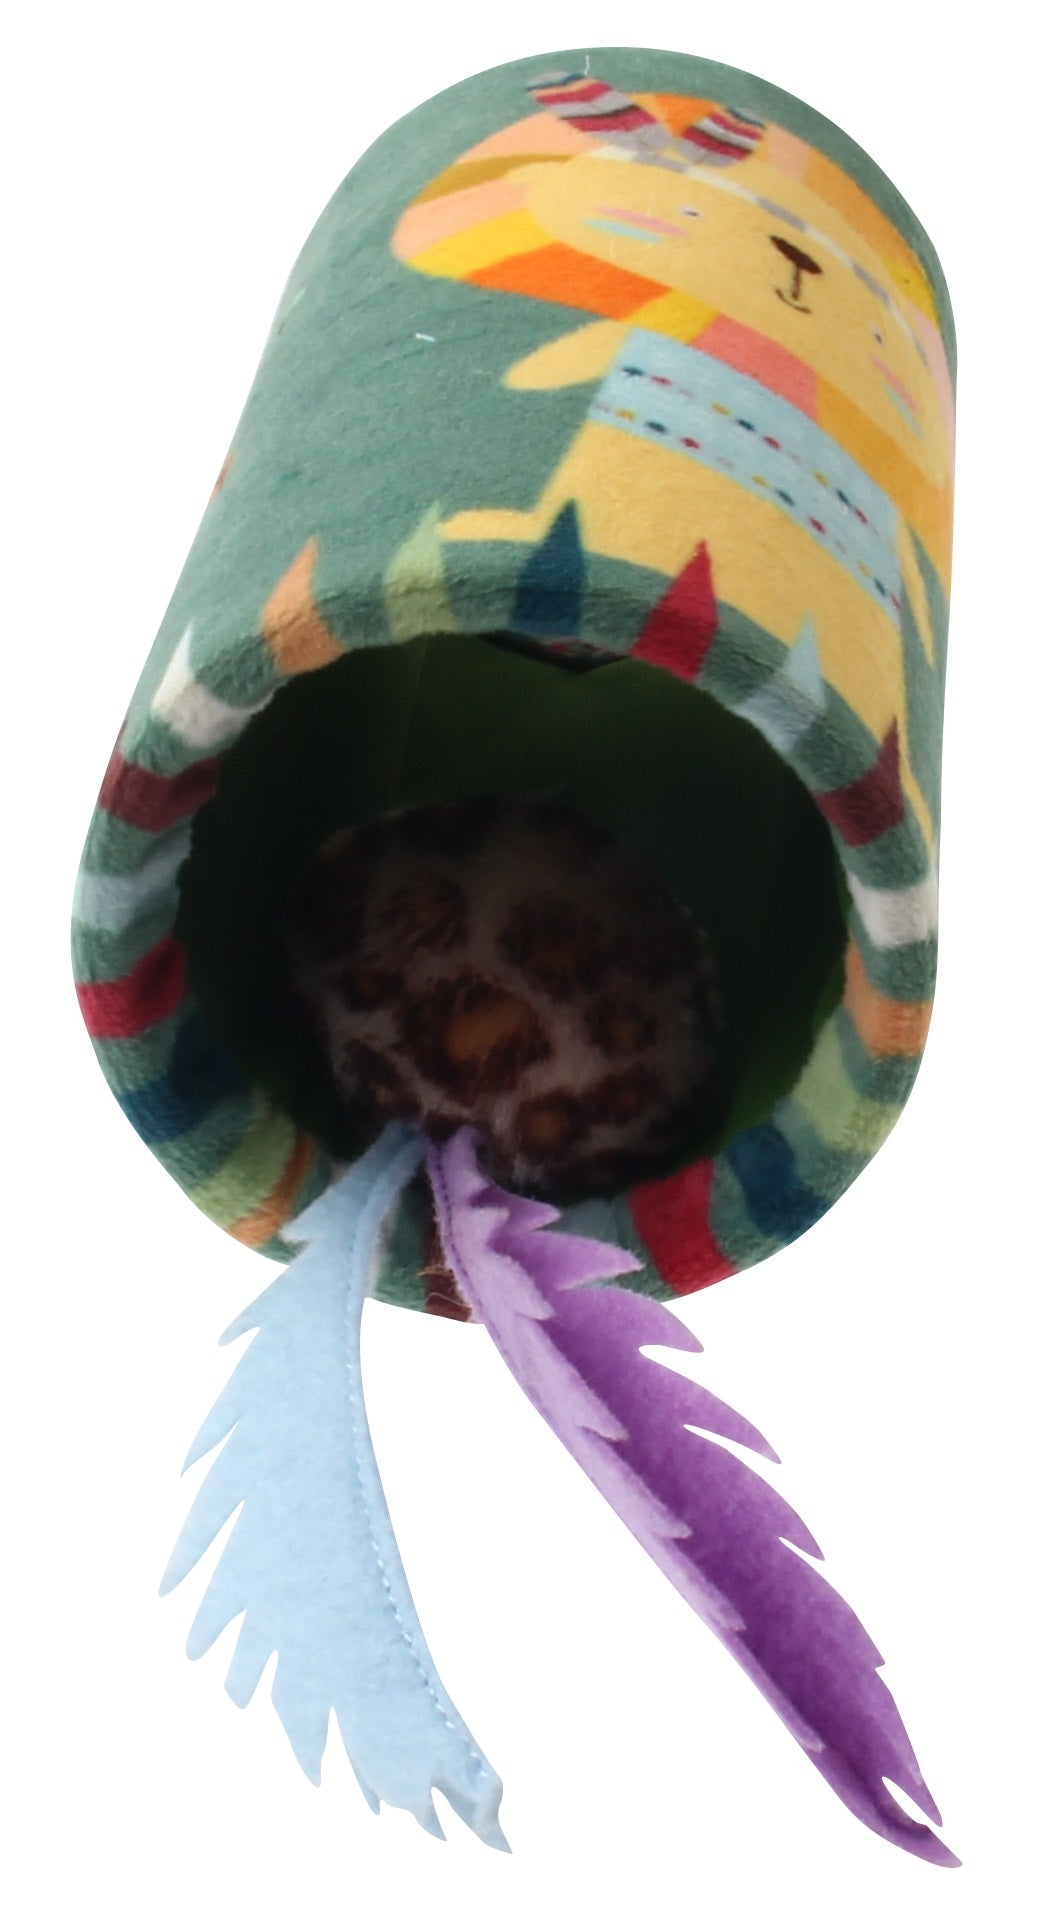 Gigwi Happy Indian Melody Lion Tube With Sound Chip Cat Toy